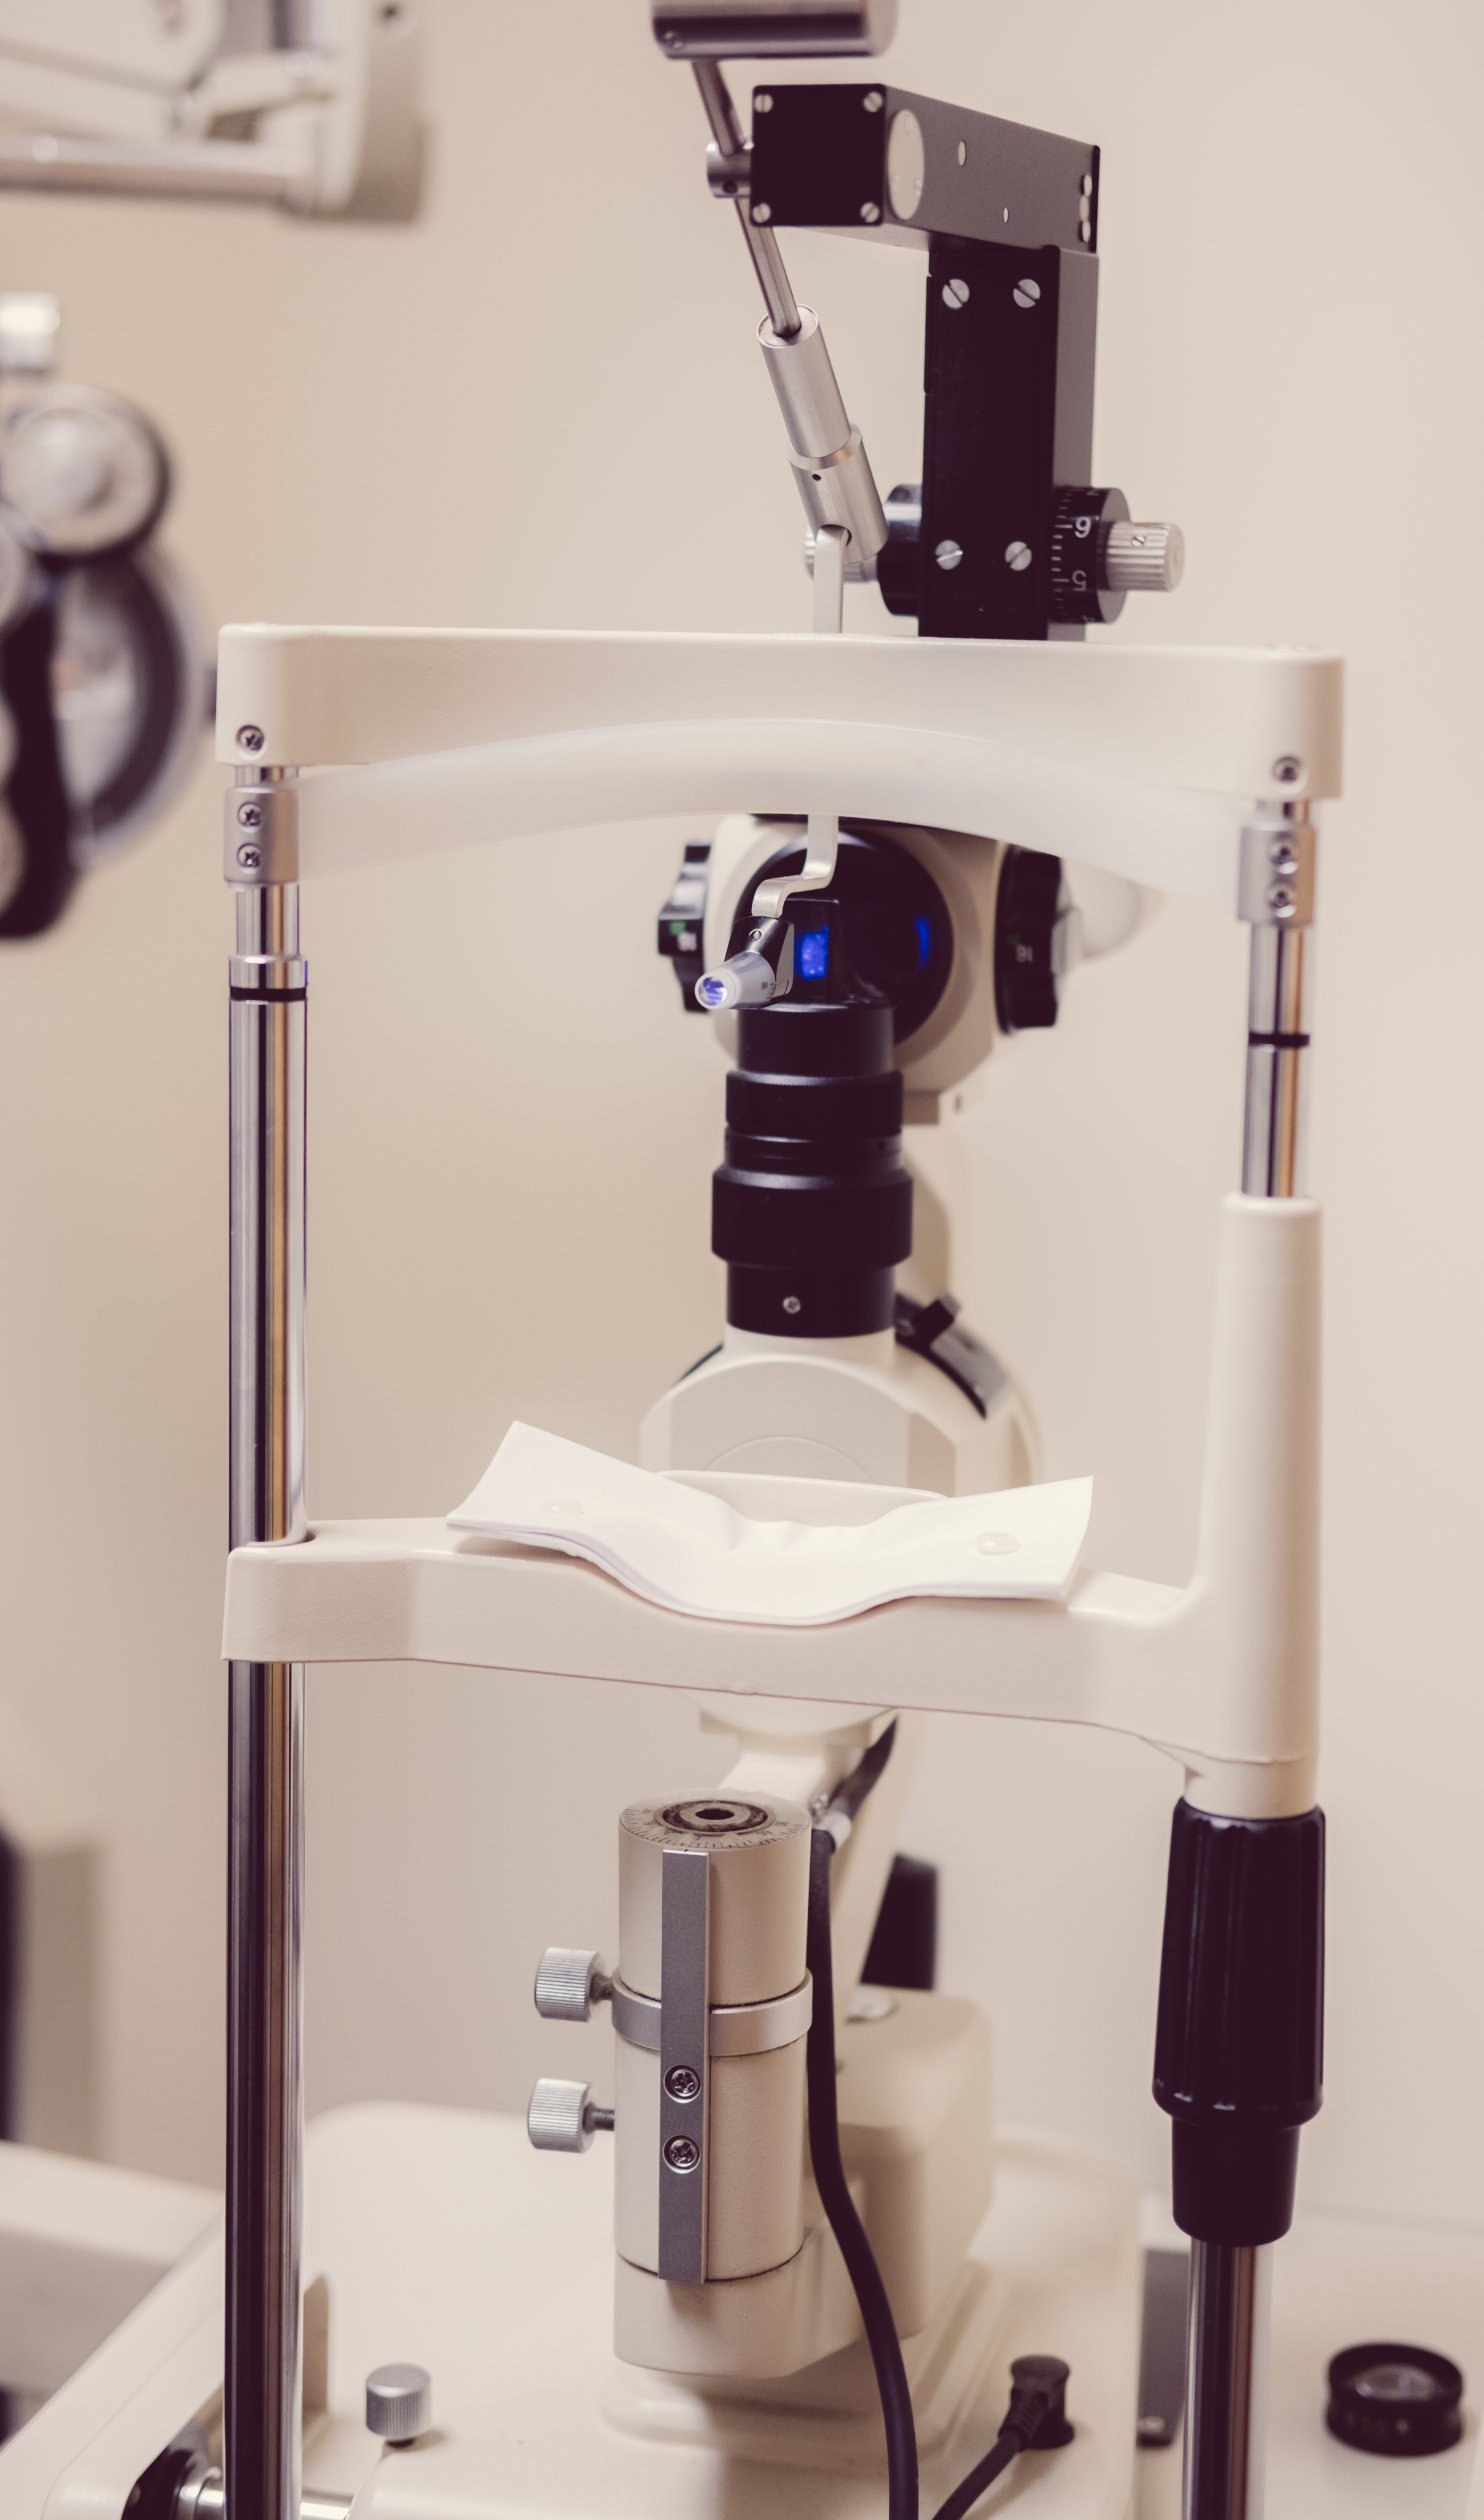 slit lamp examination machine used in ophthalmology and optometry for eye exams